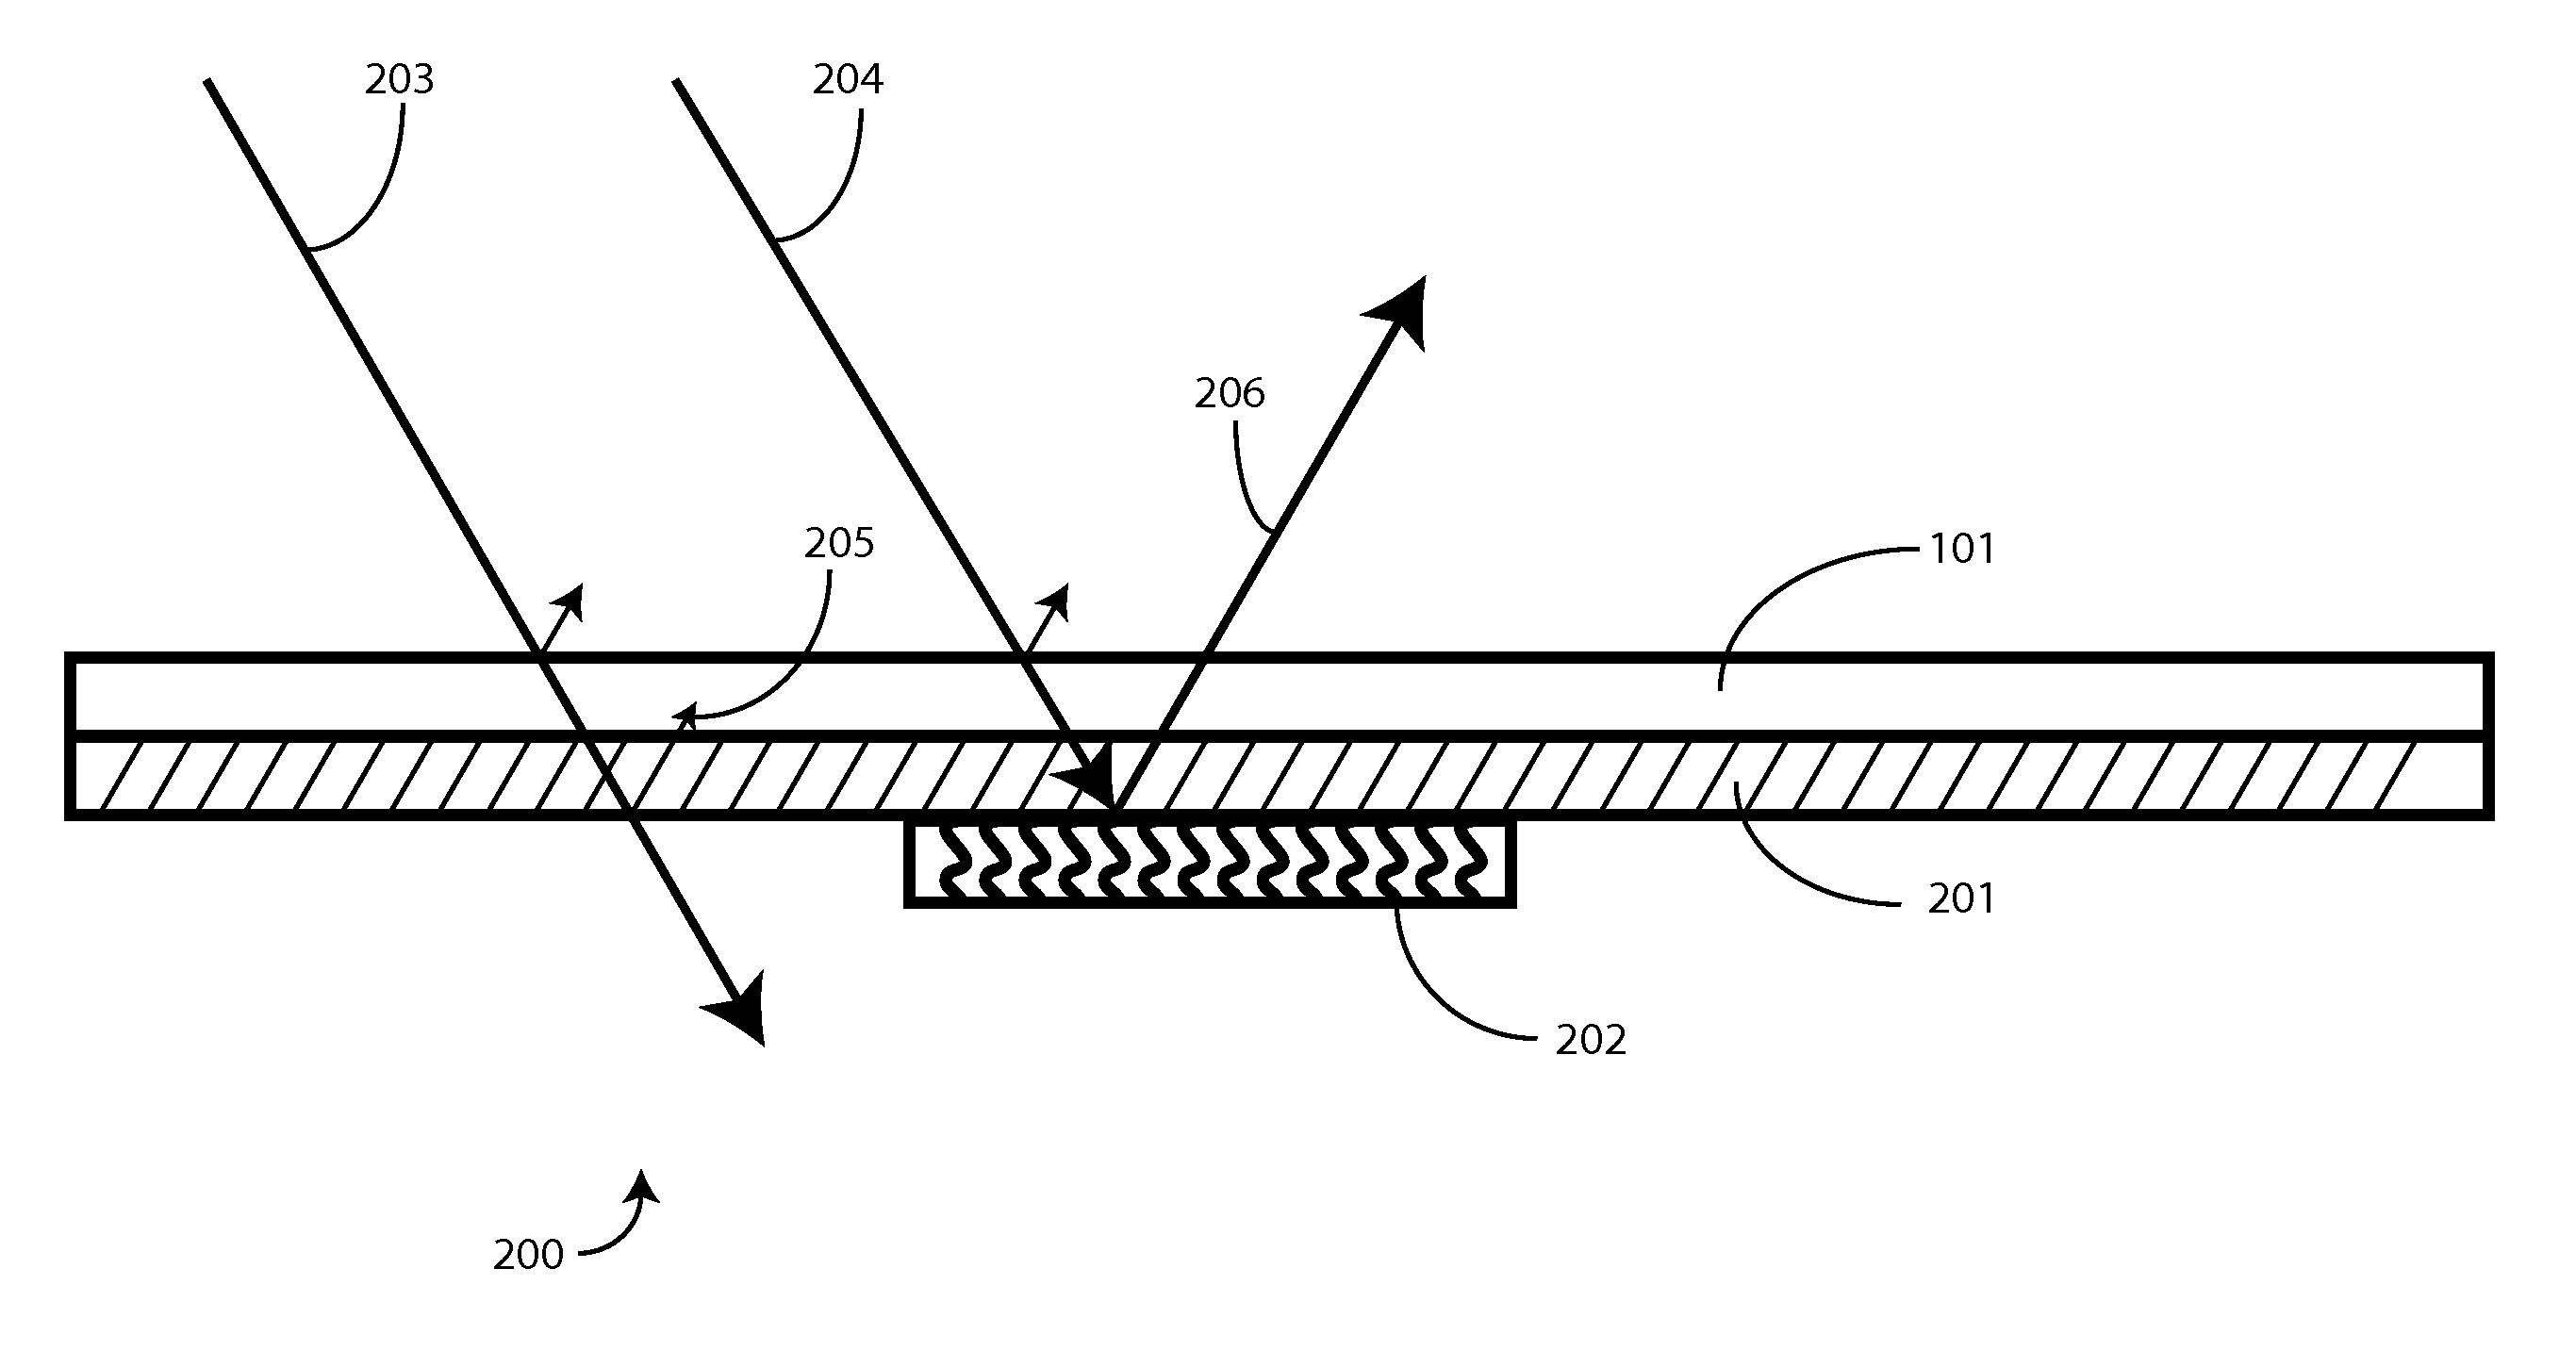 Electrically non-interfering printing for electronic devices having capacitive touch sensors